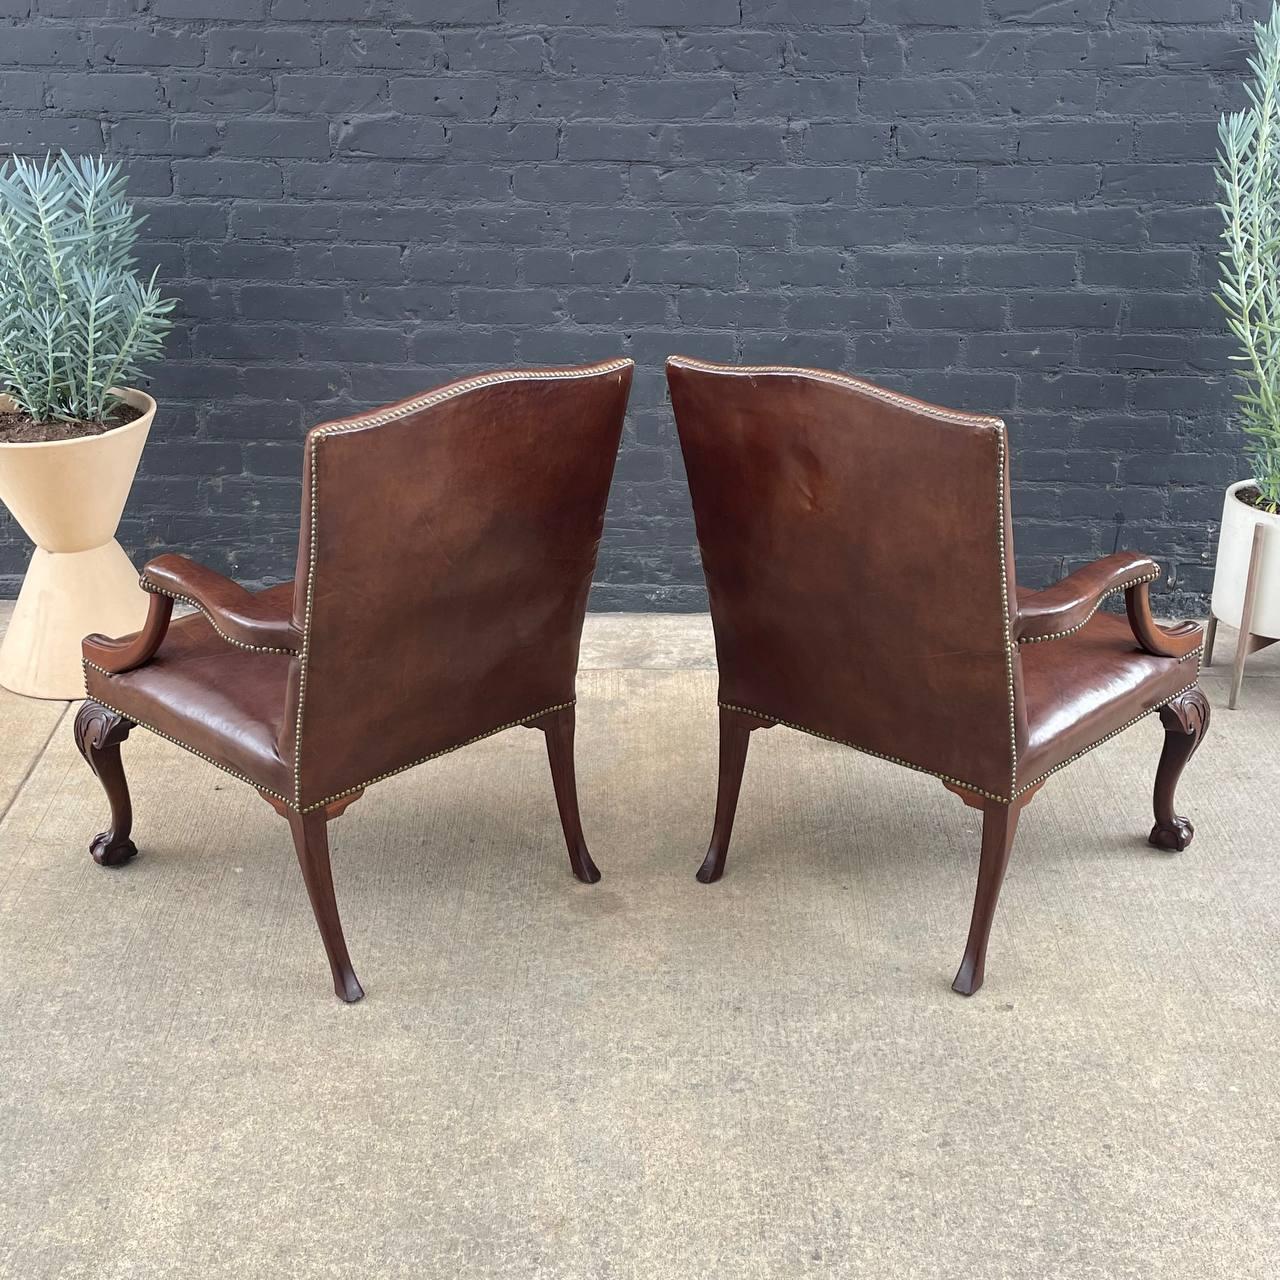 Mid-20th Century Pair of English Chippendale-Style Gainsborough Leather Arm Chairs For Sale